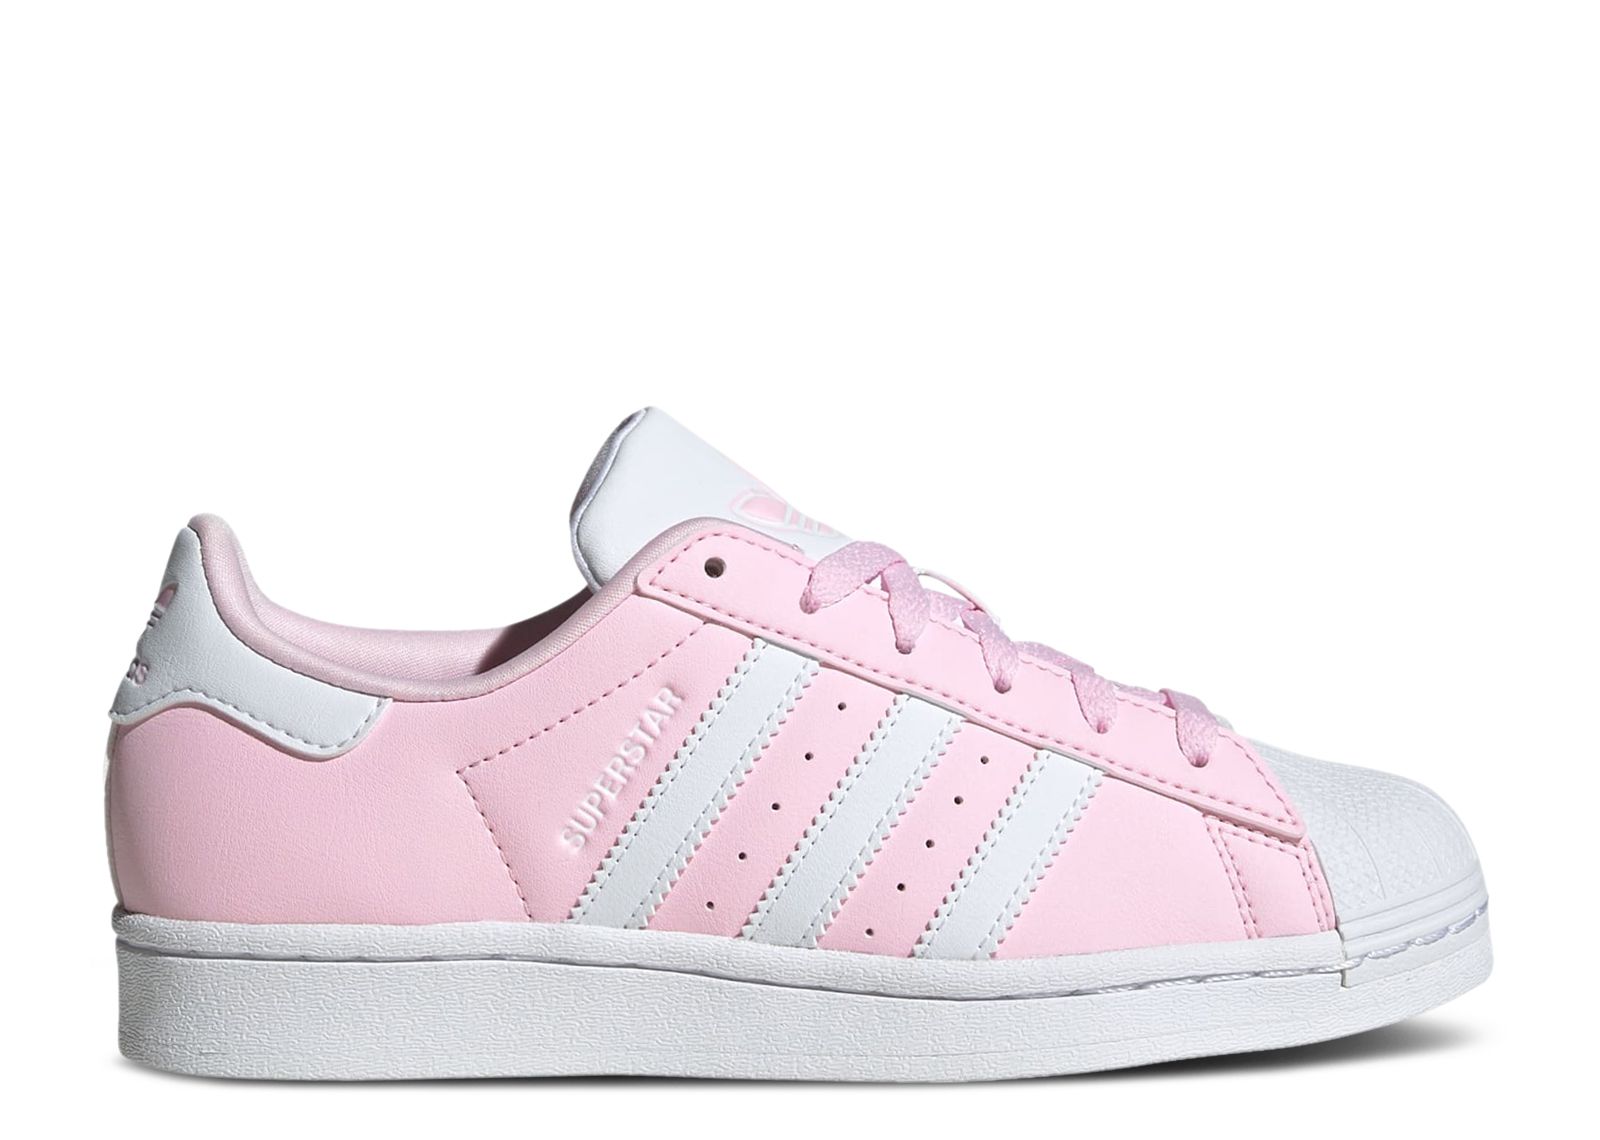 Superstar J 'Clear Pink' - Adidas - IG0252 - clear pink/cloud white ...